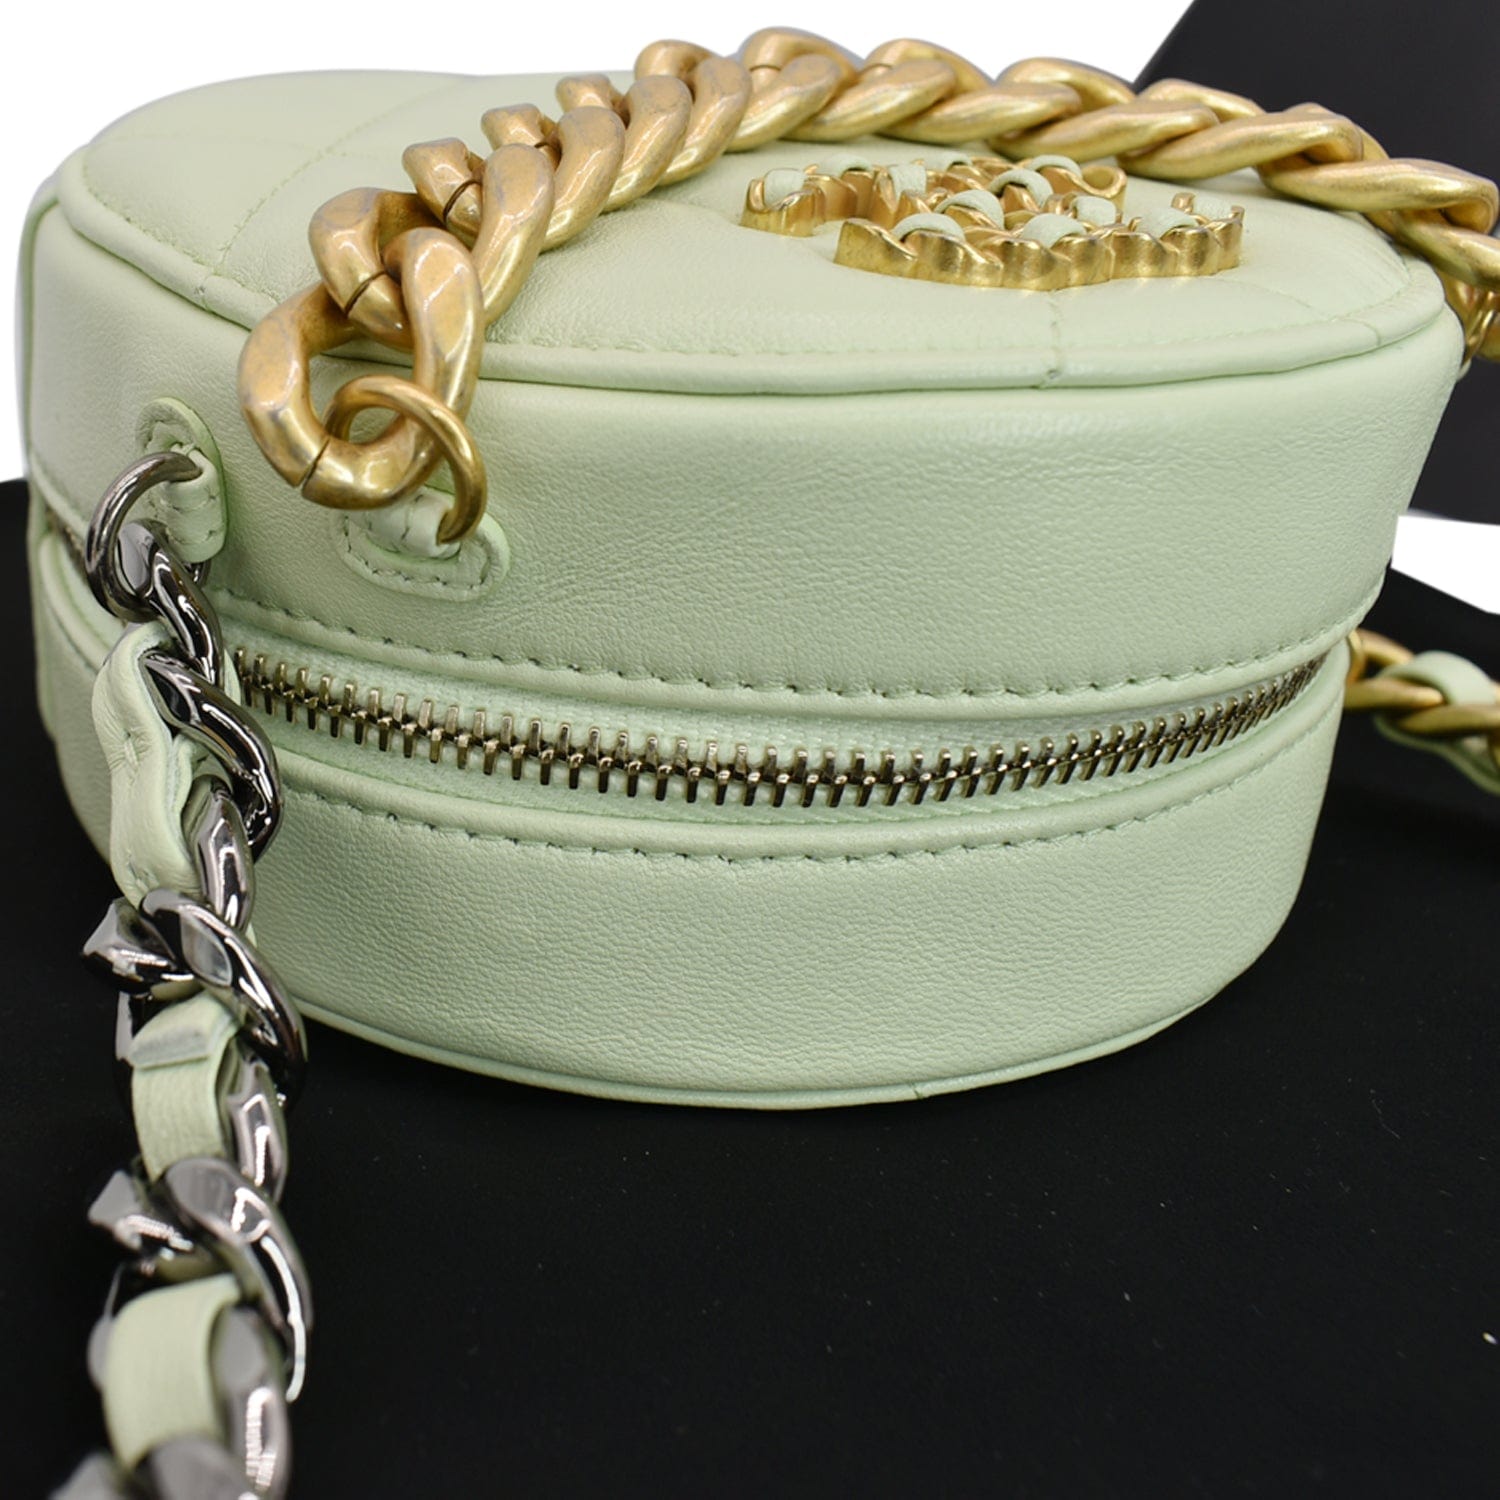 Green Quilted Caviar Round Crossbody